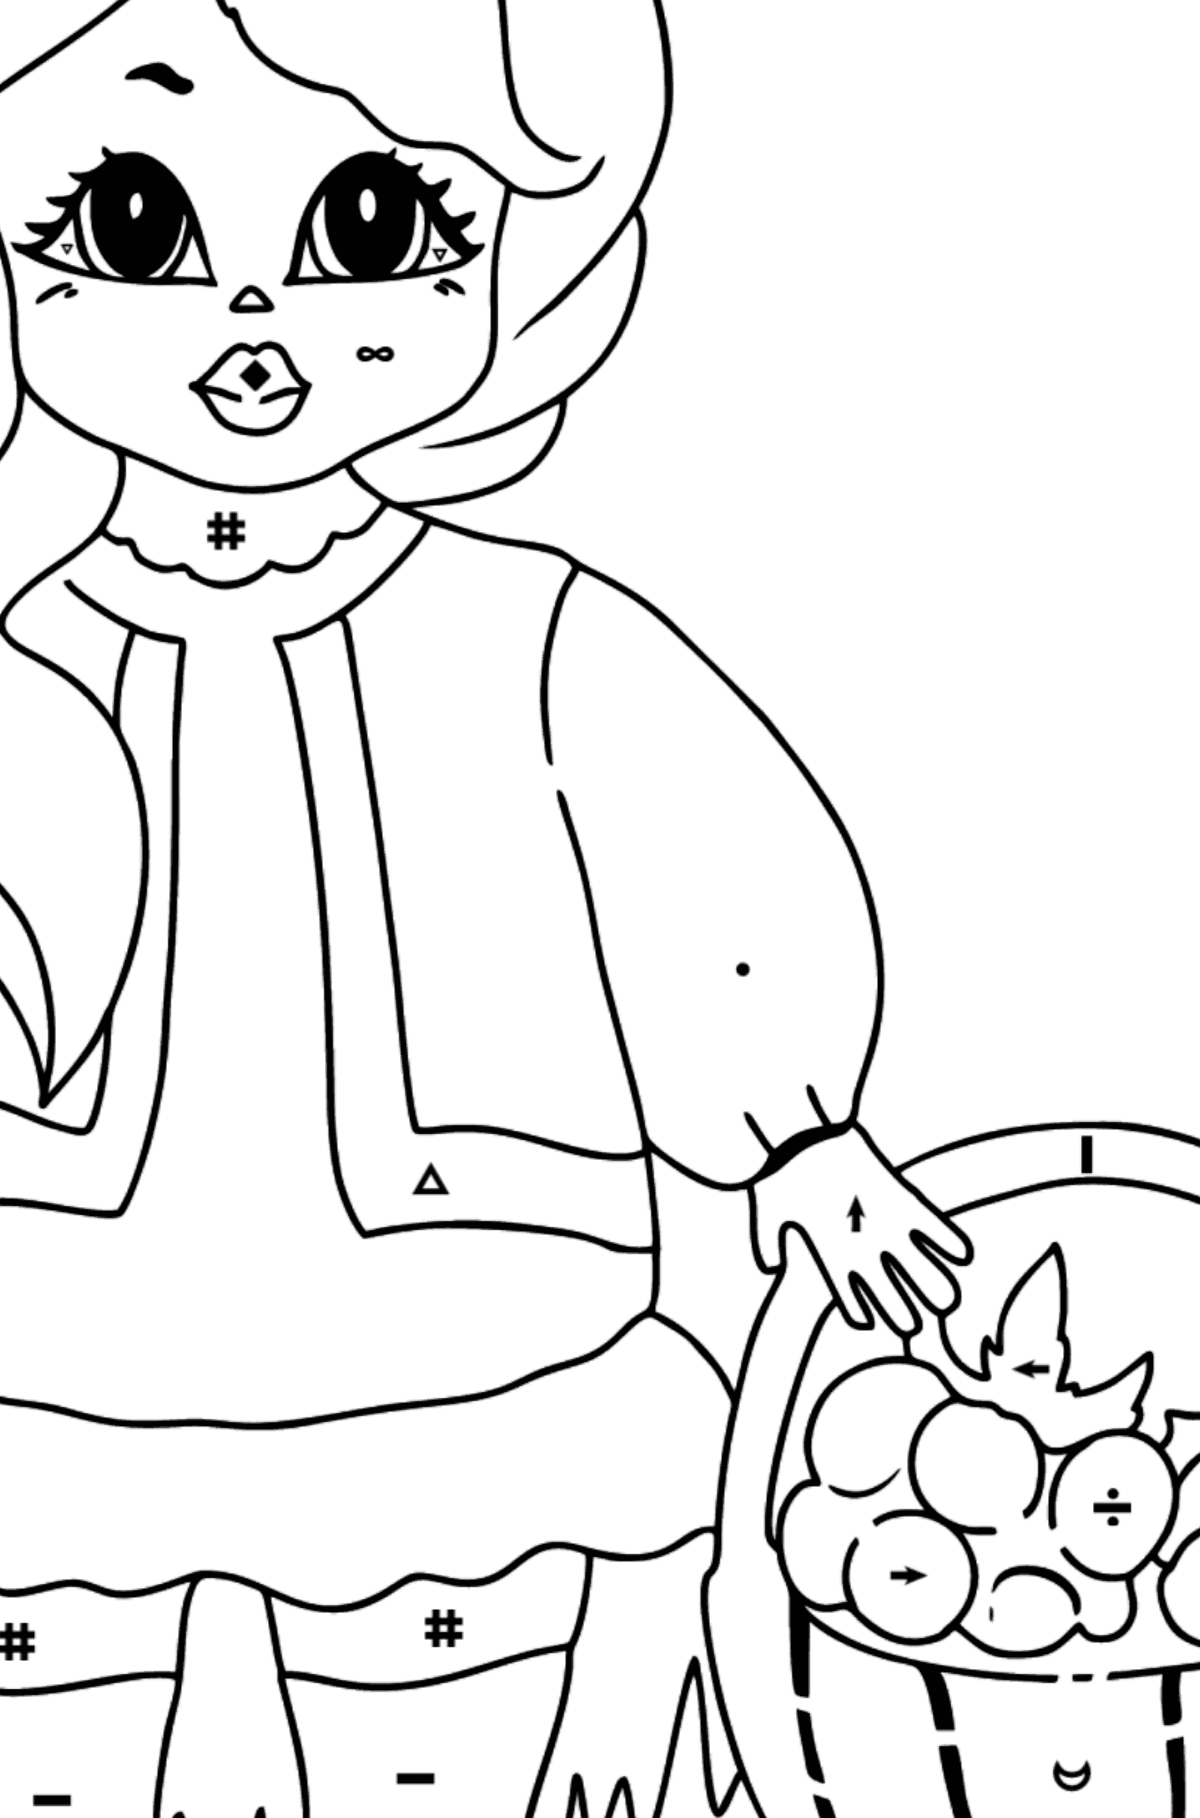 Coloring Page - A Princess with a Basket - Coloring by Symbols for Kids